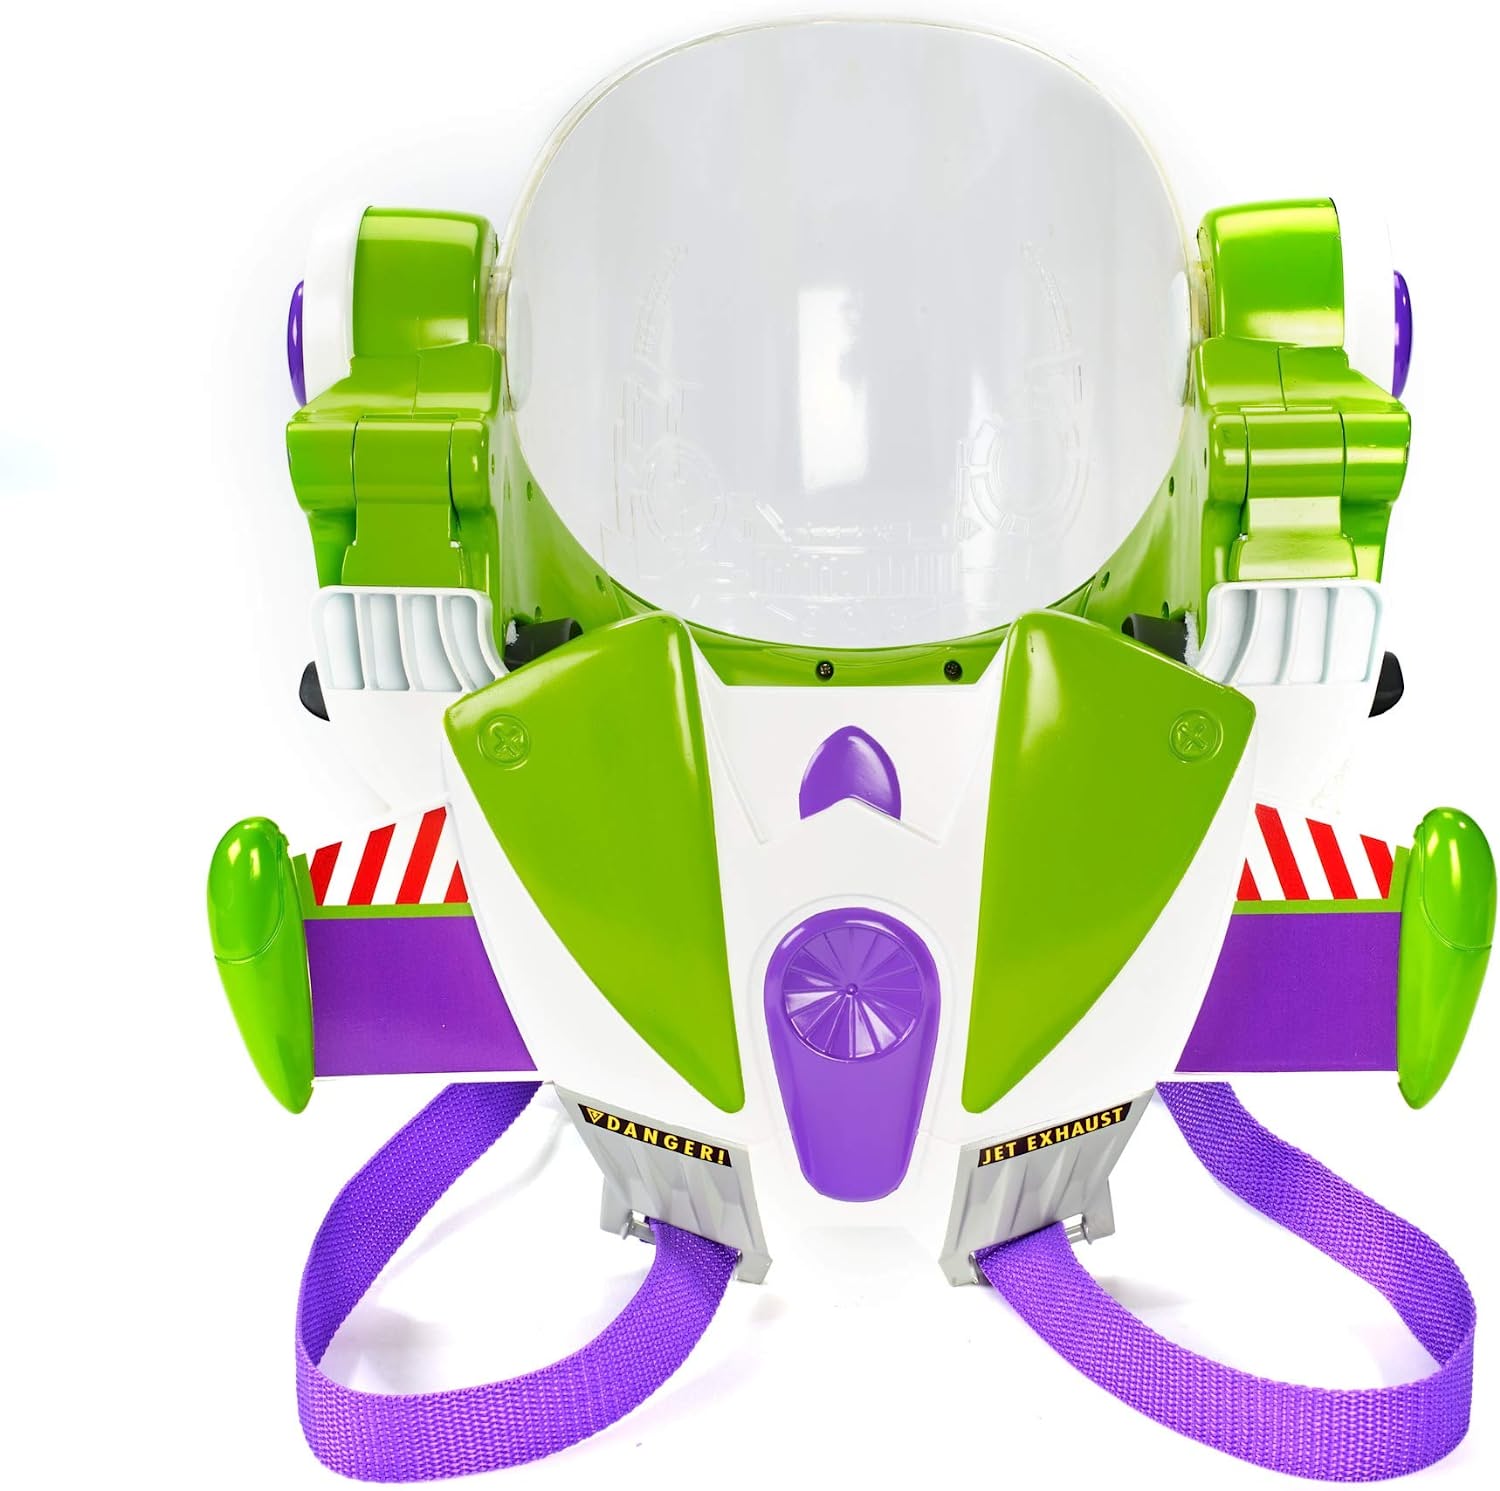 ''Disney Pixar Toy Story 4 Buzz Lightyear Toy Astronaut HELMET for Role-play Movie Action with Jetpac